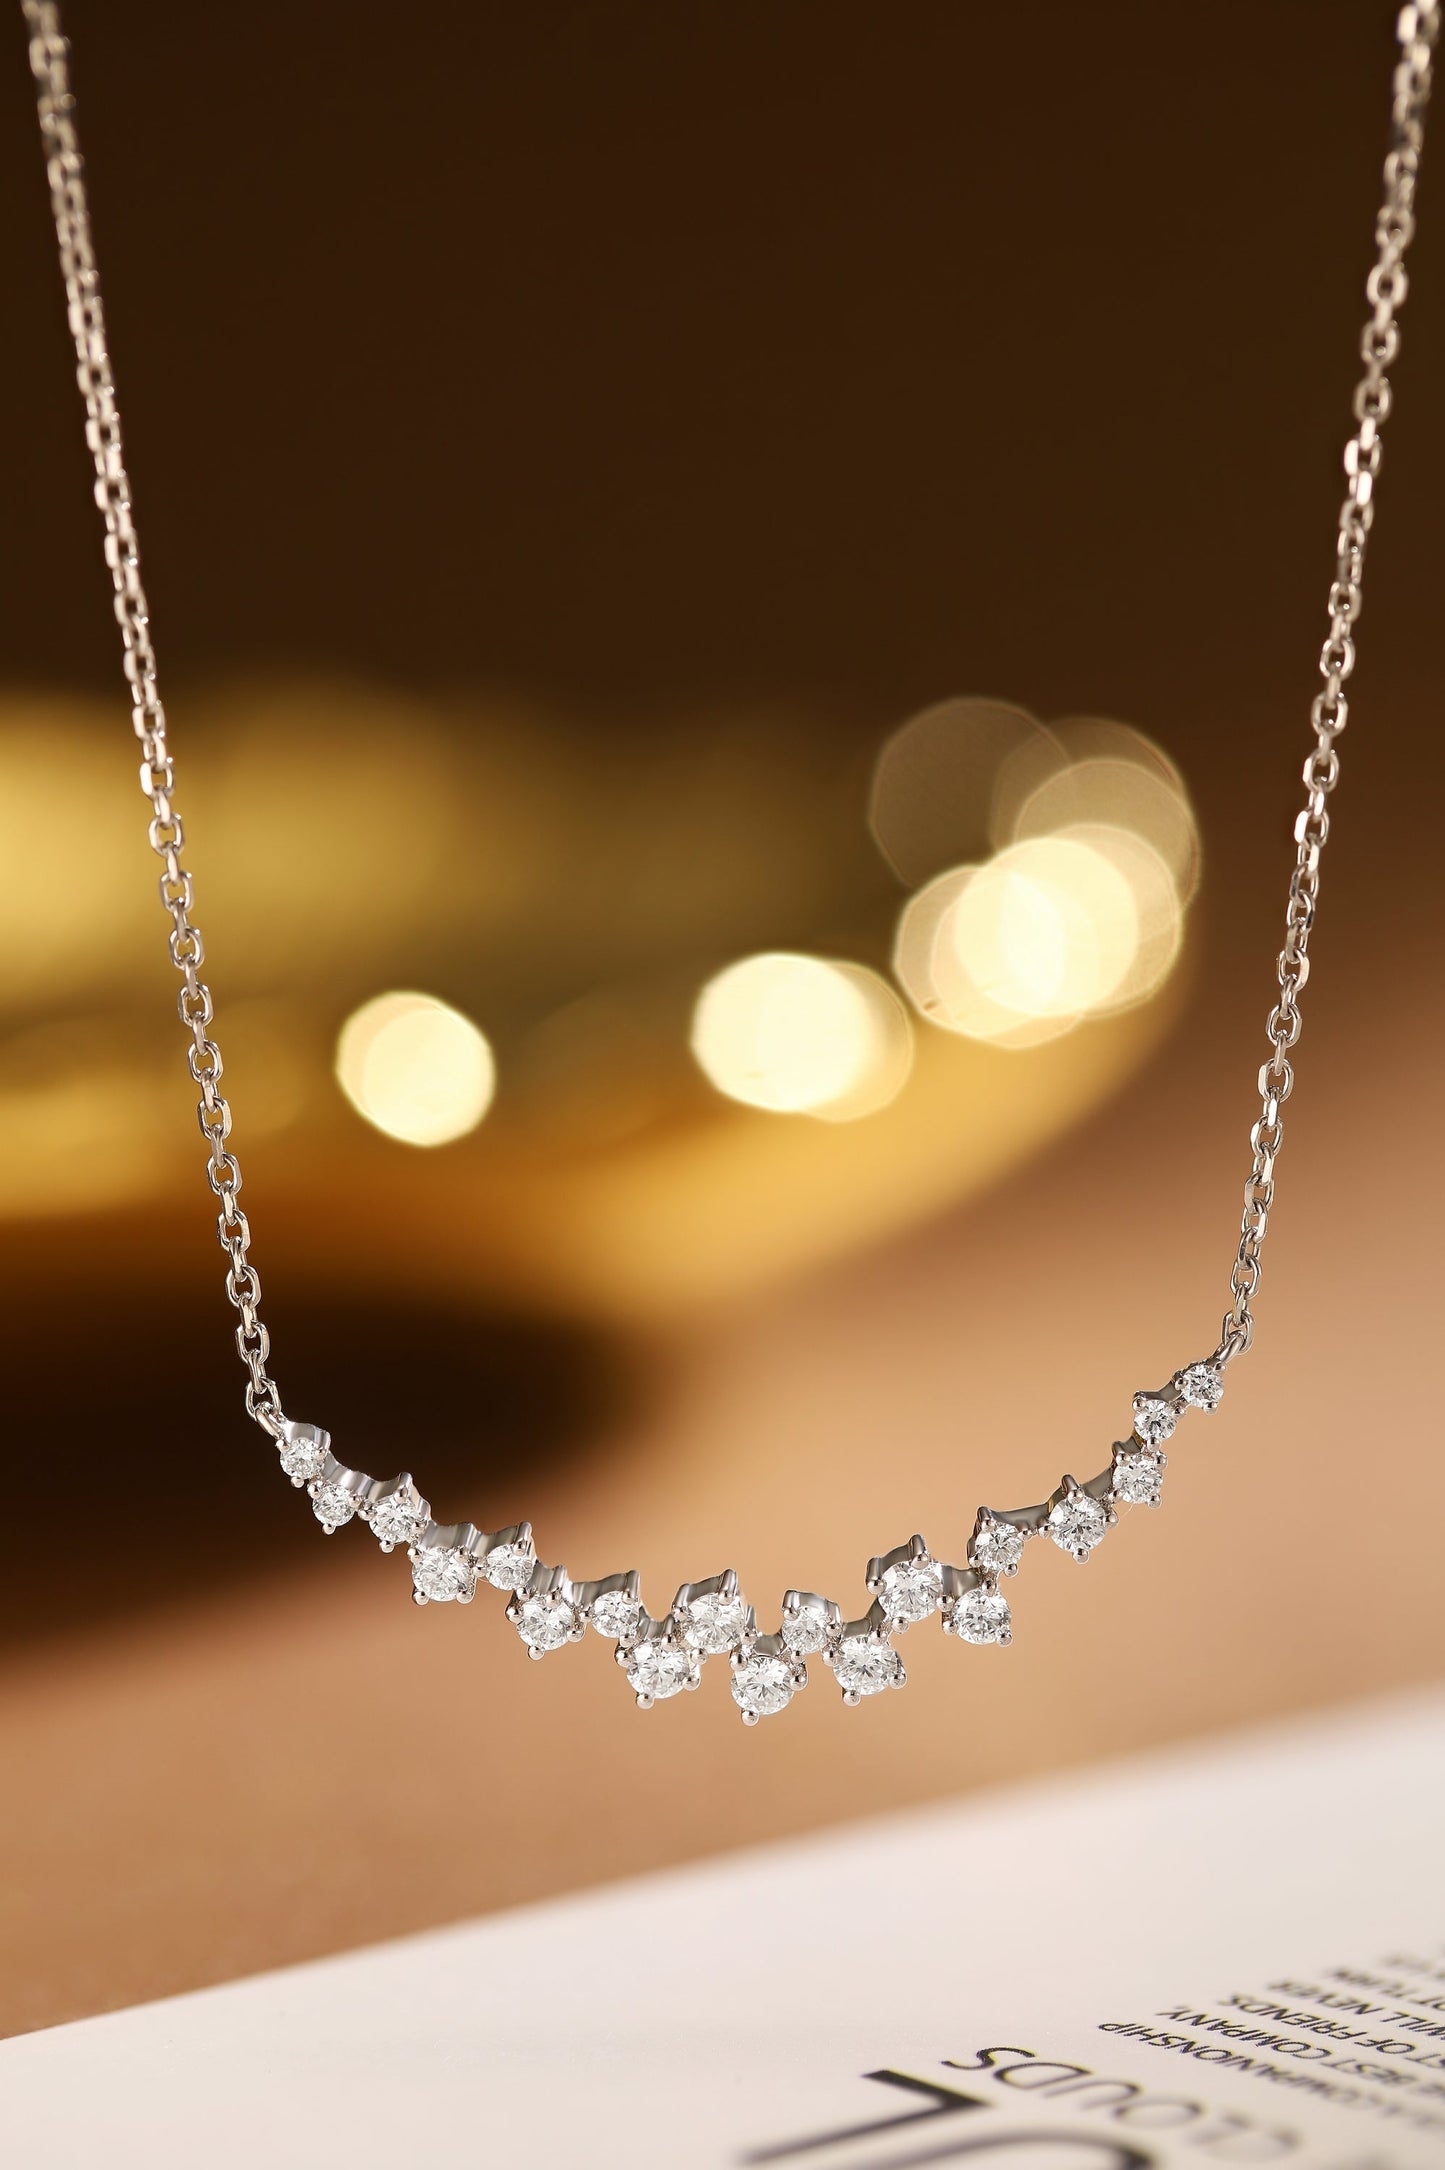 LEGACY--K18 White Gold and Diamonds Line Necklace